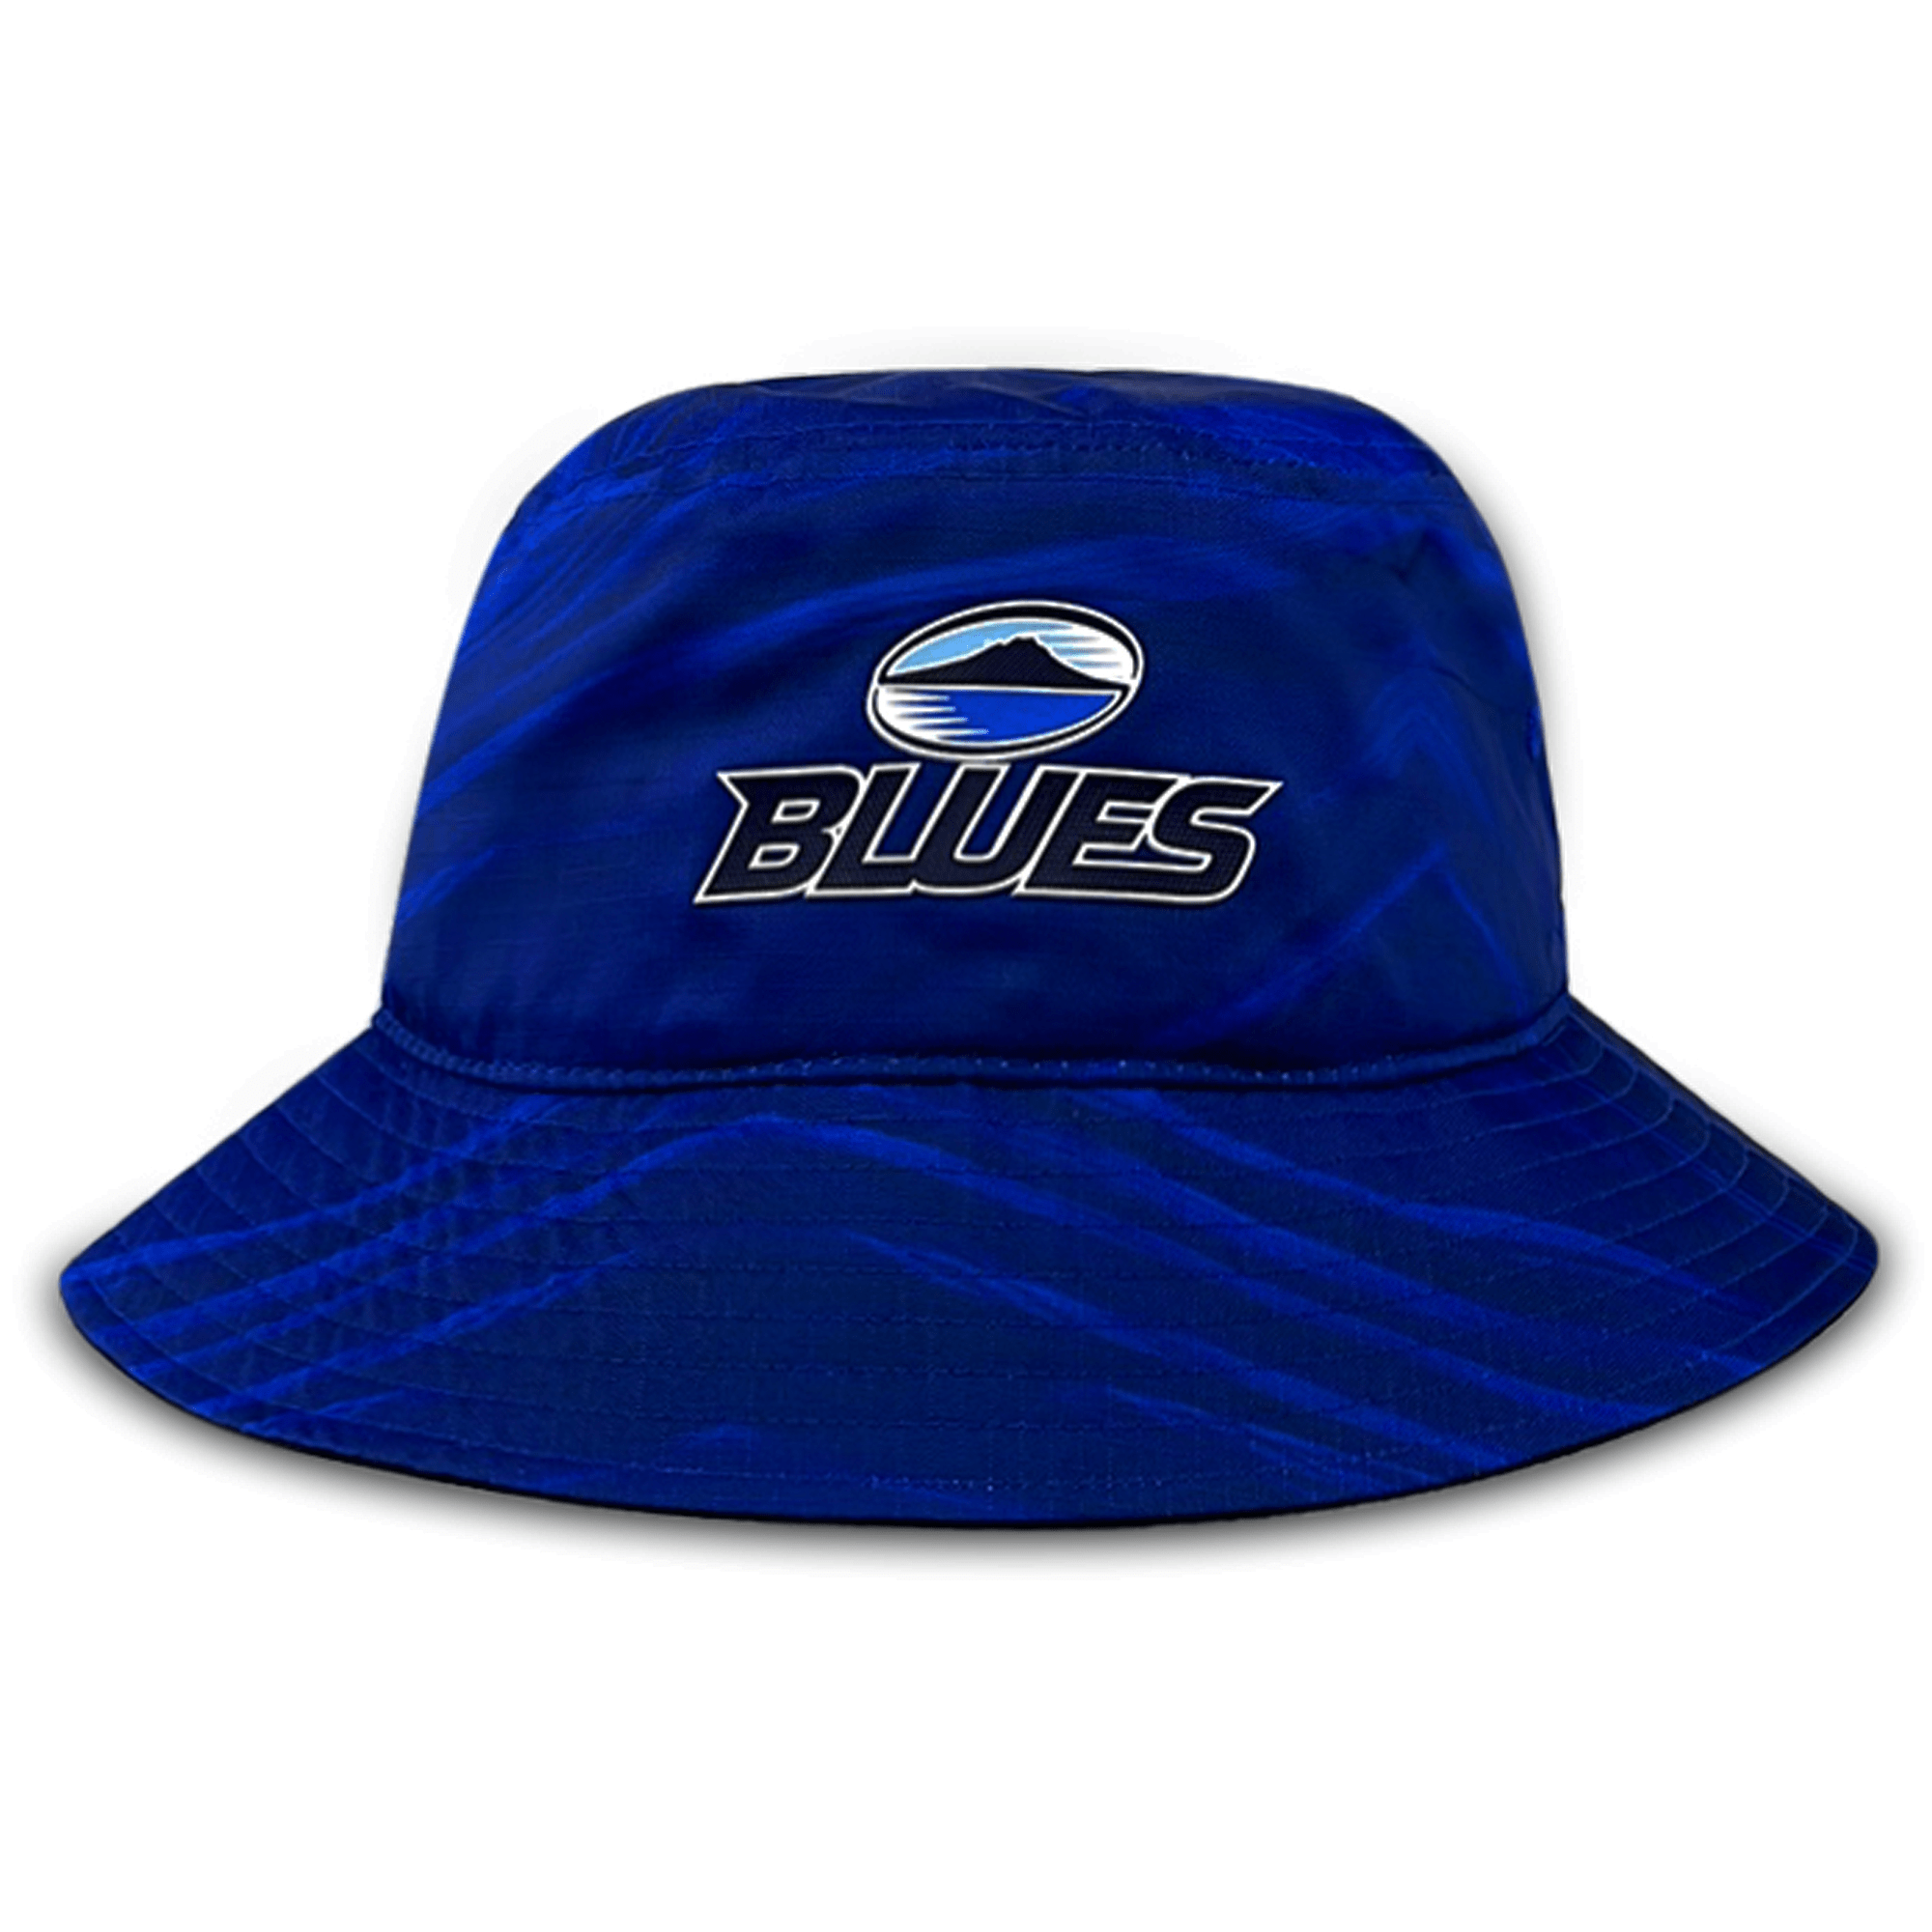 auckland blues products for sale